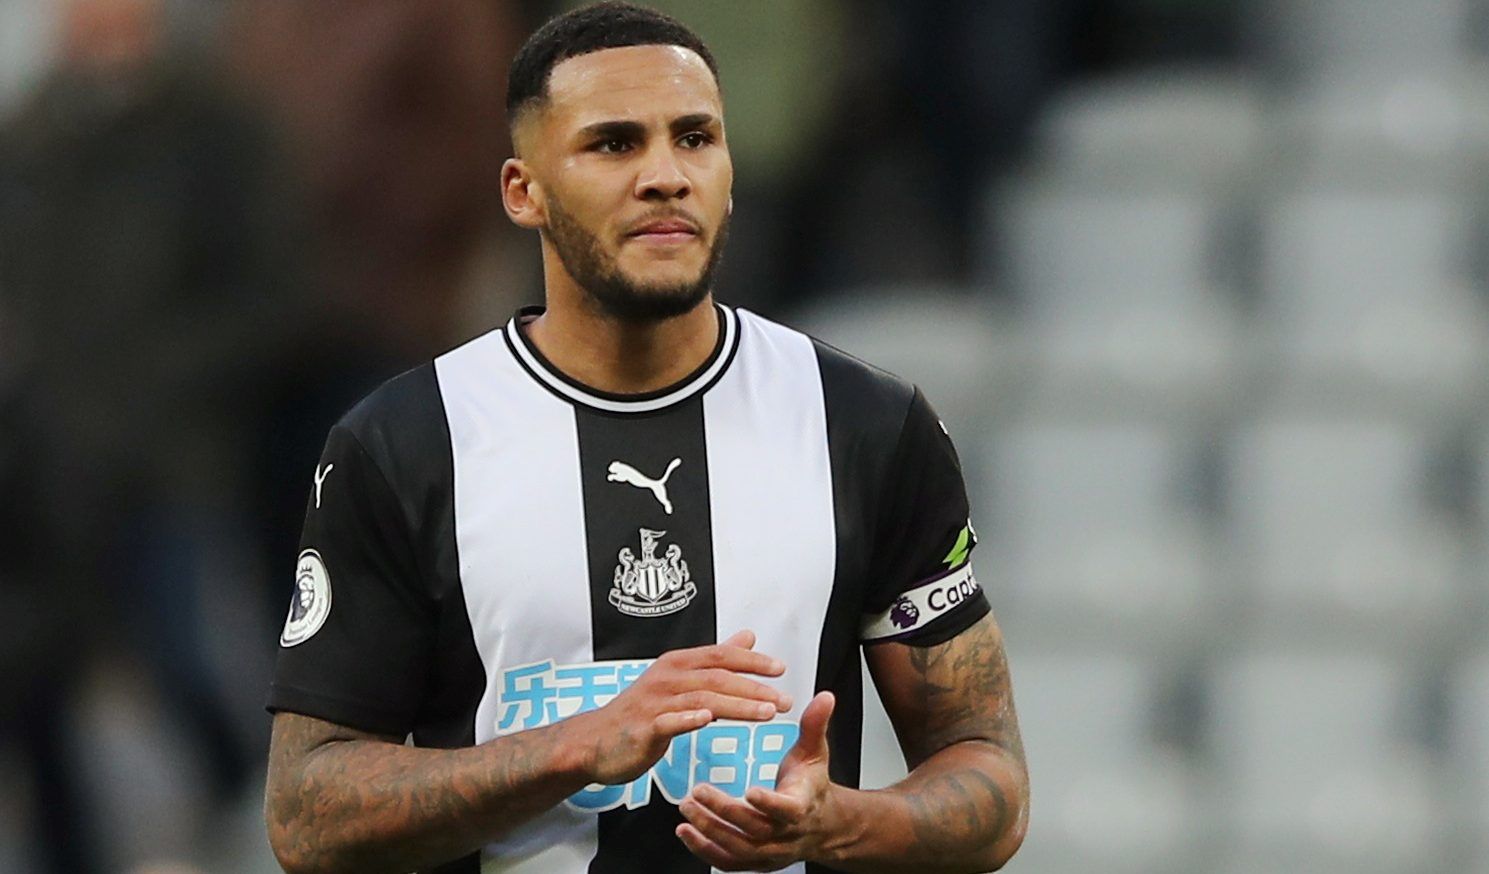 Soccer Football - Premier League - Newcastle United v Wolverhampton Wanderers - St James' Park, Newcastle, Britain - October 27, 2019 Newcastle United's Jamaal Lascelles after the match  Action Images via Reuters/Molly Darlington  EDITORIAL USE ONLY. No use with unauthorized audio, video, data, fixture lists, club/league logos or 